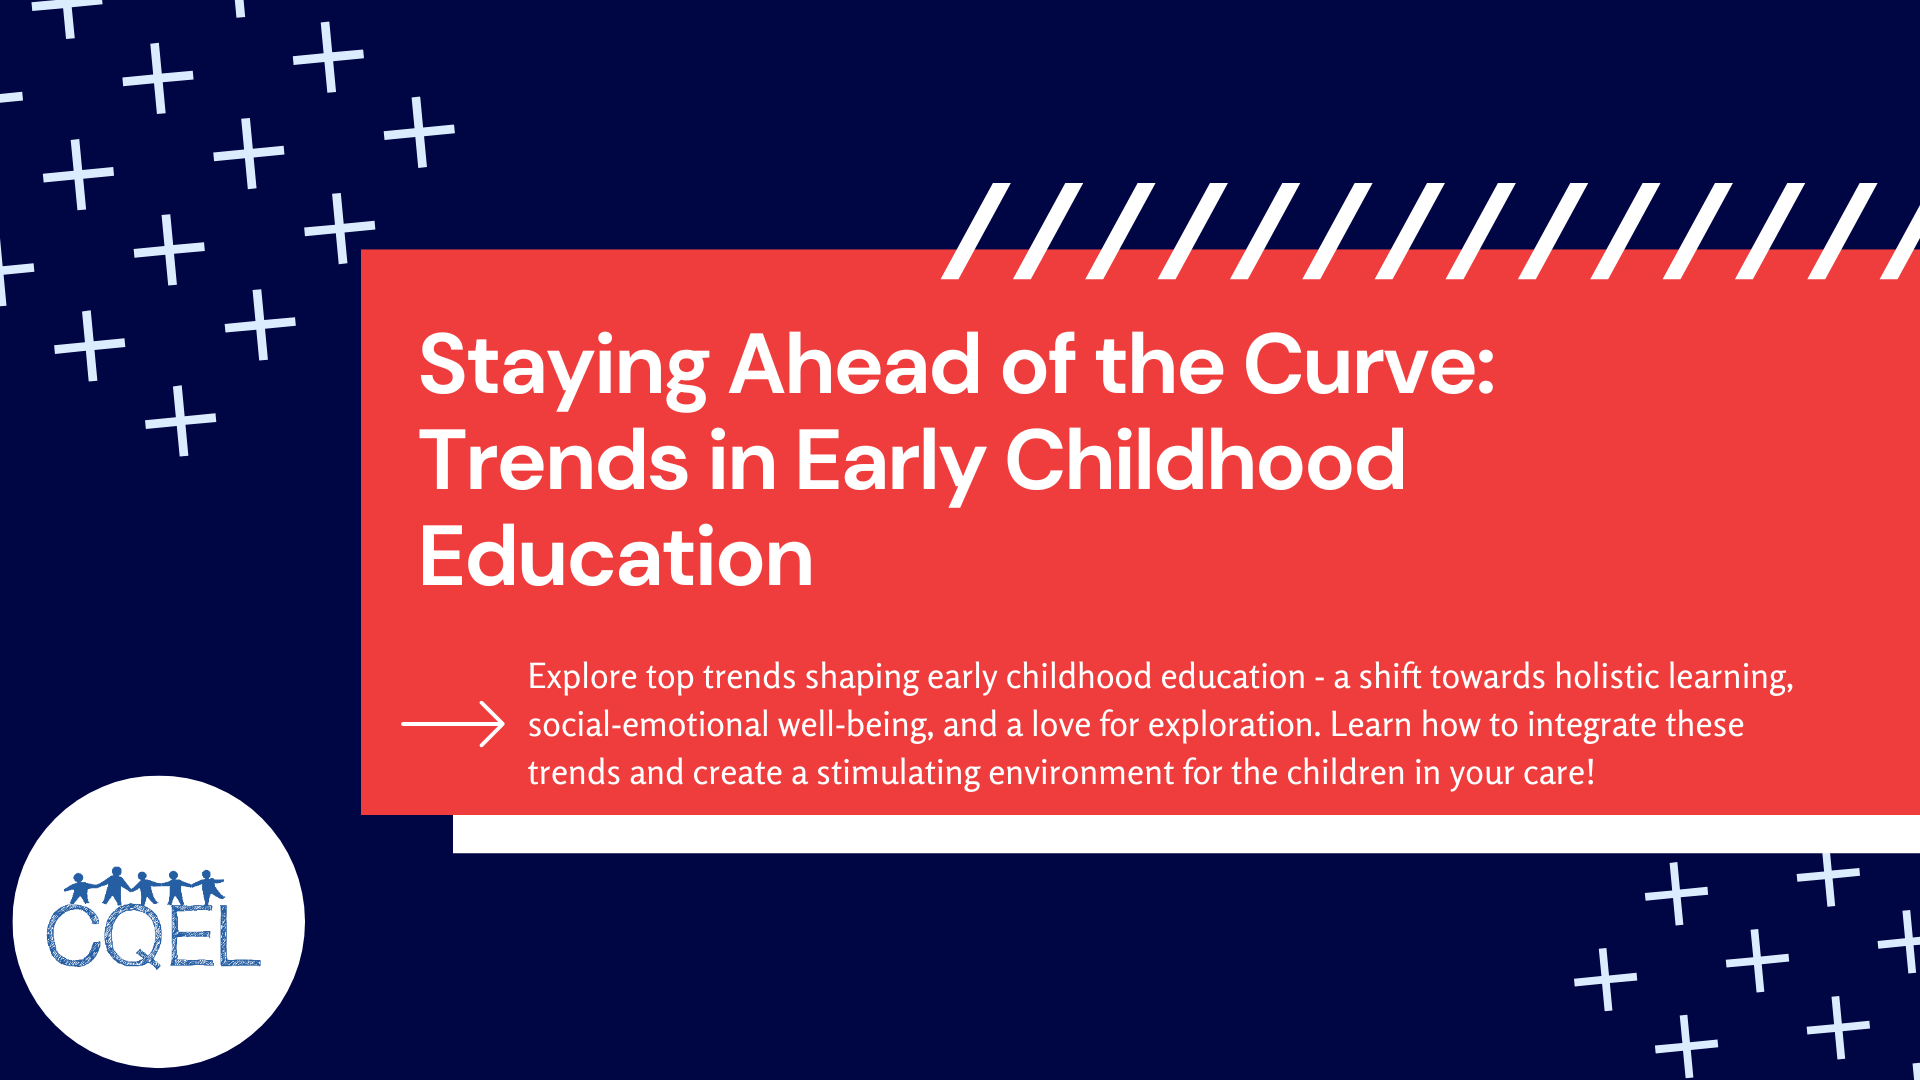 Staying Ahead of the Curve: Trends in Early Childhood Education